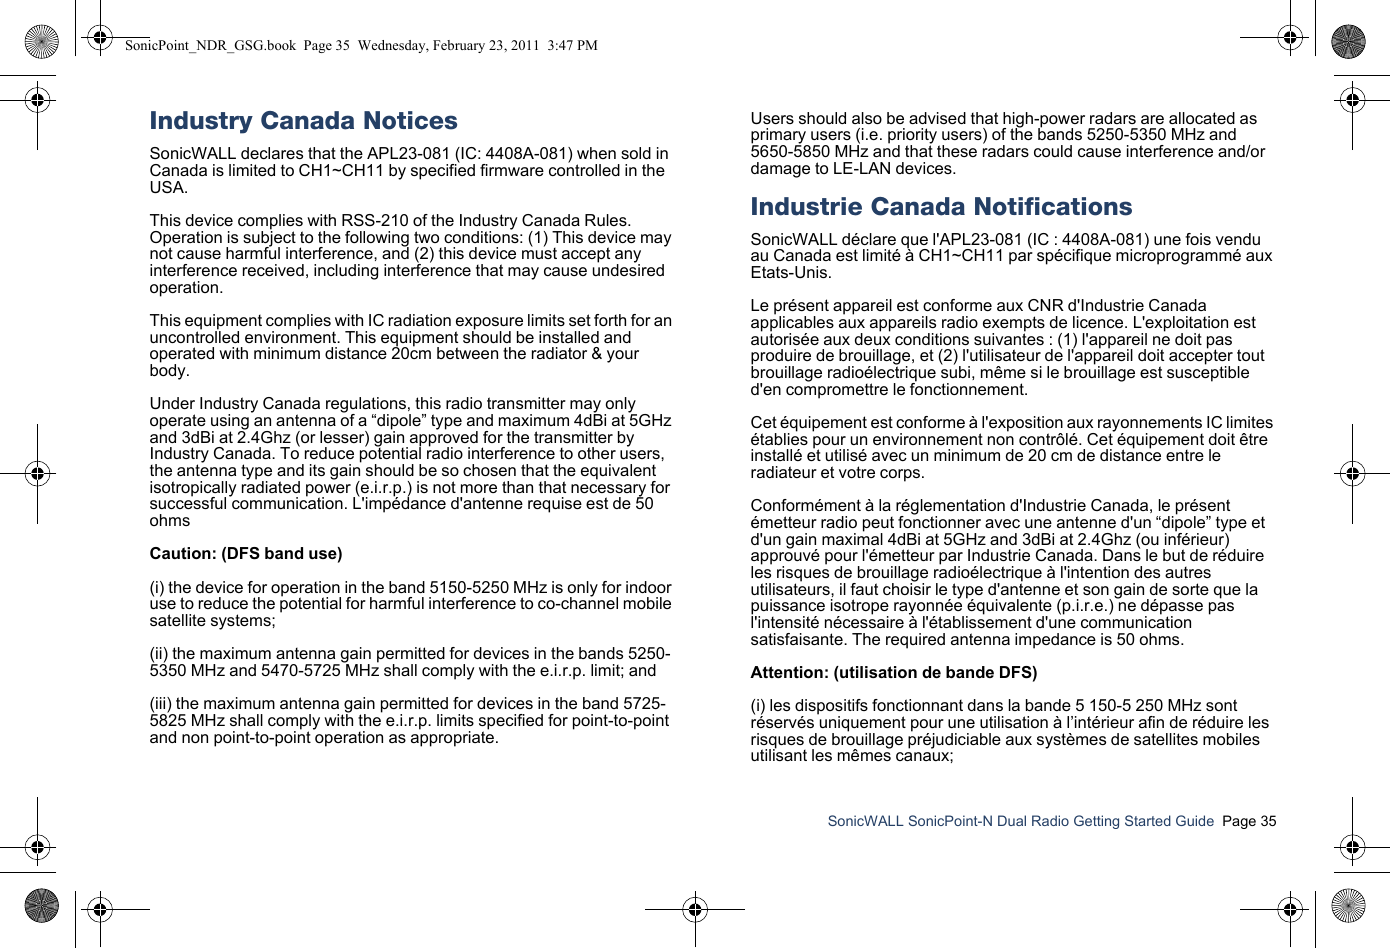 SonicWALL SonicPoint-N Dual Radio Getting Started Guide  Page 35Industry Canada NoticesSonicWALL declares that the APL23-081 (IC: 4408A-081) when sold in Canada is limited to CH1~CH11 by specified firmware controlled in the USA.This device complies with RSS-210 of the Industry Canada Rules. Operation is subject to the following two conditions: (1) This device may not cause harmful interference, and (2) this device must accept any interference received, including interference that may cause undesired operation.This equipment complies with IC radiation exposure limits set forth for an uncontrolled environment. This equipment should be installed and operated with minimum distance 20cm between the radiator &amp; your body.Under Industry Canada regulations, this radio transmitter may only operate using an antenna of a “dipole” type and maximum 4dBi at 5GHz and 3dBi at 2.4Ghz (or lesser) gain approved for the transmitter by Industry Canada. To reduce potential radio interference to other users, the antenna type and its gain should be so chosen that the equivalent isotropically radiated power (e.i.r.p.) is not more than that necessary for successful communication. L&apos;impédance d&apos;antenne requise est de 50 ohmsCaution: (DFS band use)(i) the device for operation in the band 5150-5250 MHz is only for indoor use to reduce the potential for harmful interference to co-channel mobile satellite systems;(ii) the maximum antenna gain permitted for devices in the bands 5250-5350 MHz and 5470-5725 MHz shall comply with the e.i.r.p. limit; and(iii) the maximum antenna gain permitted for devices in the band 5725-5825 MHz shall comply with the e.i.r.p. limits specified for point-to-point and non point-to-point operation as appropriate. Users should also be advised that high-power radars are allocated as primary users (i.e. priority users) of the bands 5250-5350 MHz and 5650-5850 MHz and that these radars could cause interference and/or damage to LE-LAN devices.Industrie Canada NotificationsSonicWALL déclare que l&apos;APL23-081 (IC : 4408A-081) une fois vendu au Canada est limité à CH1~CH11 par spécifique microprogrammé aux Etats-Unis.Le présent appareil est conforme aux CNR d&apos;Industrie Canada applicables aux appareils radio exempts de licence. L&apos;exploitation est autorisée aux deux conditions suivantes : (1) l&apos;appareil ne doit pas produire de brouillage, et (2) l&apos;utilisateur de l&apos;appareil doit accepter tout brouillage radioélectrique subi, même si le brouillage est susceptible d&apos;en compromettre le fonctionnement.Cet équipement est conforme à l&apos;exposition aux rayonnements IC limites établies pour un environnement non contrôlé. Cet équipement doit être installé et utilisé avec un minimum de 20 cm de distance entre le radiateur et votre corps.Conformément à la réglementation d&apos;Industrie Canada, le présent émetteur radio peut fonctionner avec une antenne d&apos;un “dipole” type et d&apos;un gain maximal 4dBi at 5GHz and 3dBi at 2.4Ghz (ou inférieur) approuvé pour l&apos;émetteur par Industrie Canada. Dans le but de réduire les risques de brouillage radioélectrique à l&apos;intention des autres utilisateurs, il faut choisir le type d&apos;antenne et son gain de sorte que la puissance isotrope rayonnée équivalente (p.i.r.e.) ne dépasse pas l&apos;intensité nécessaire à l&apos;établissement d&apos;une communication satisfaisante. The required antenna impedance is 50 ohms.Attention: (utilisation de bande DFS)(i) les dispositifs fonctionnant dans la bande 5 150-5 250 MHz sont réservés uniquement pour une utilisation à l’intérieur afin de réduire les risques de brouillage préjudiciable aux systèmes de satellites mobiles utilisant les mêmes canaux;SonicPoint_NDR_GSG.book  Page 35  Wednesday, February 23, 2011  3:47 PM